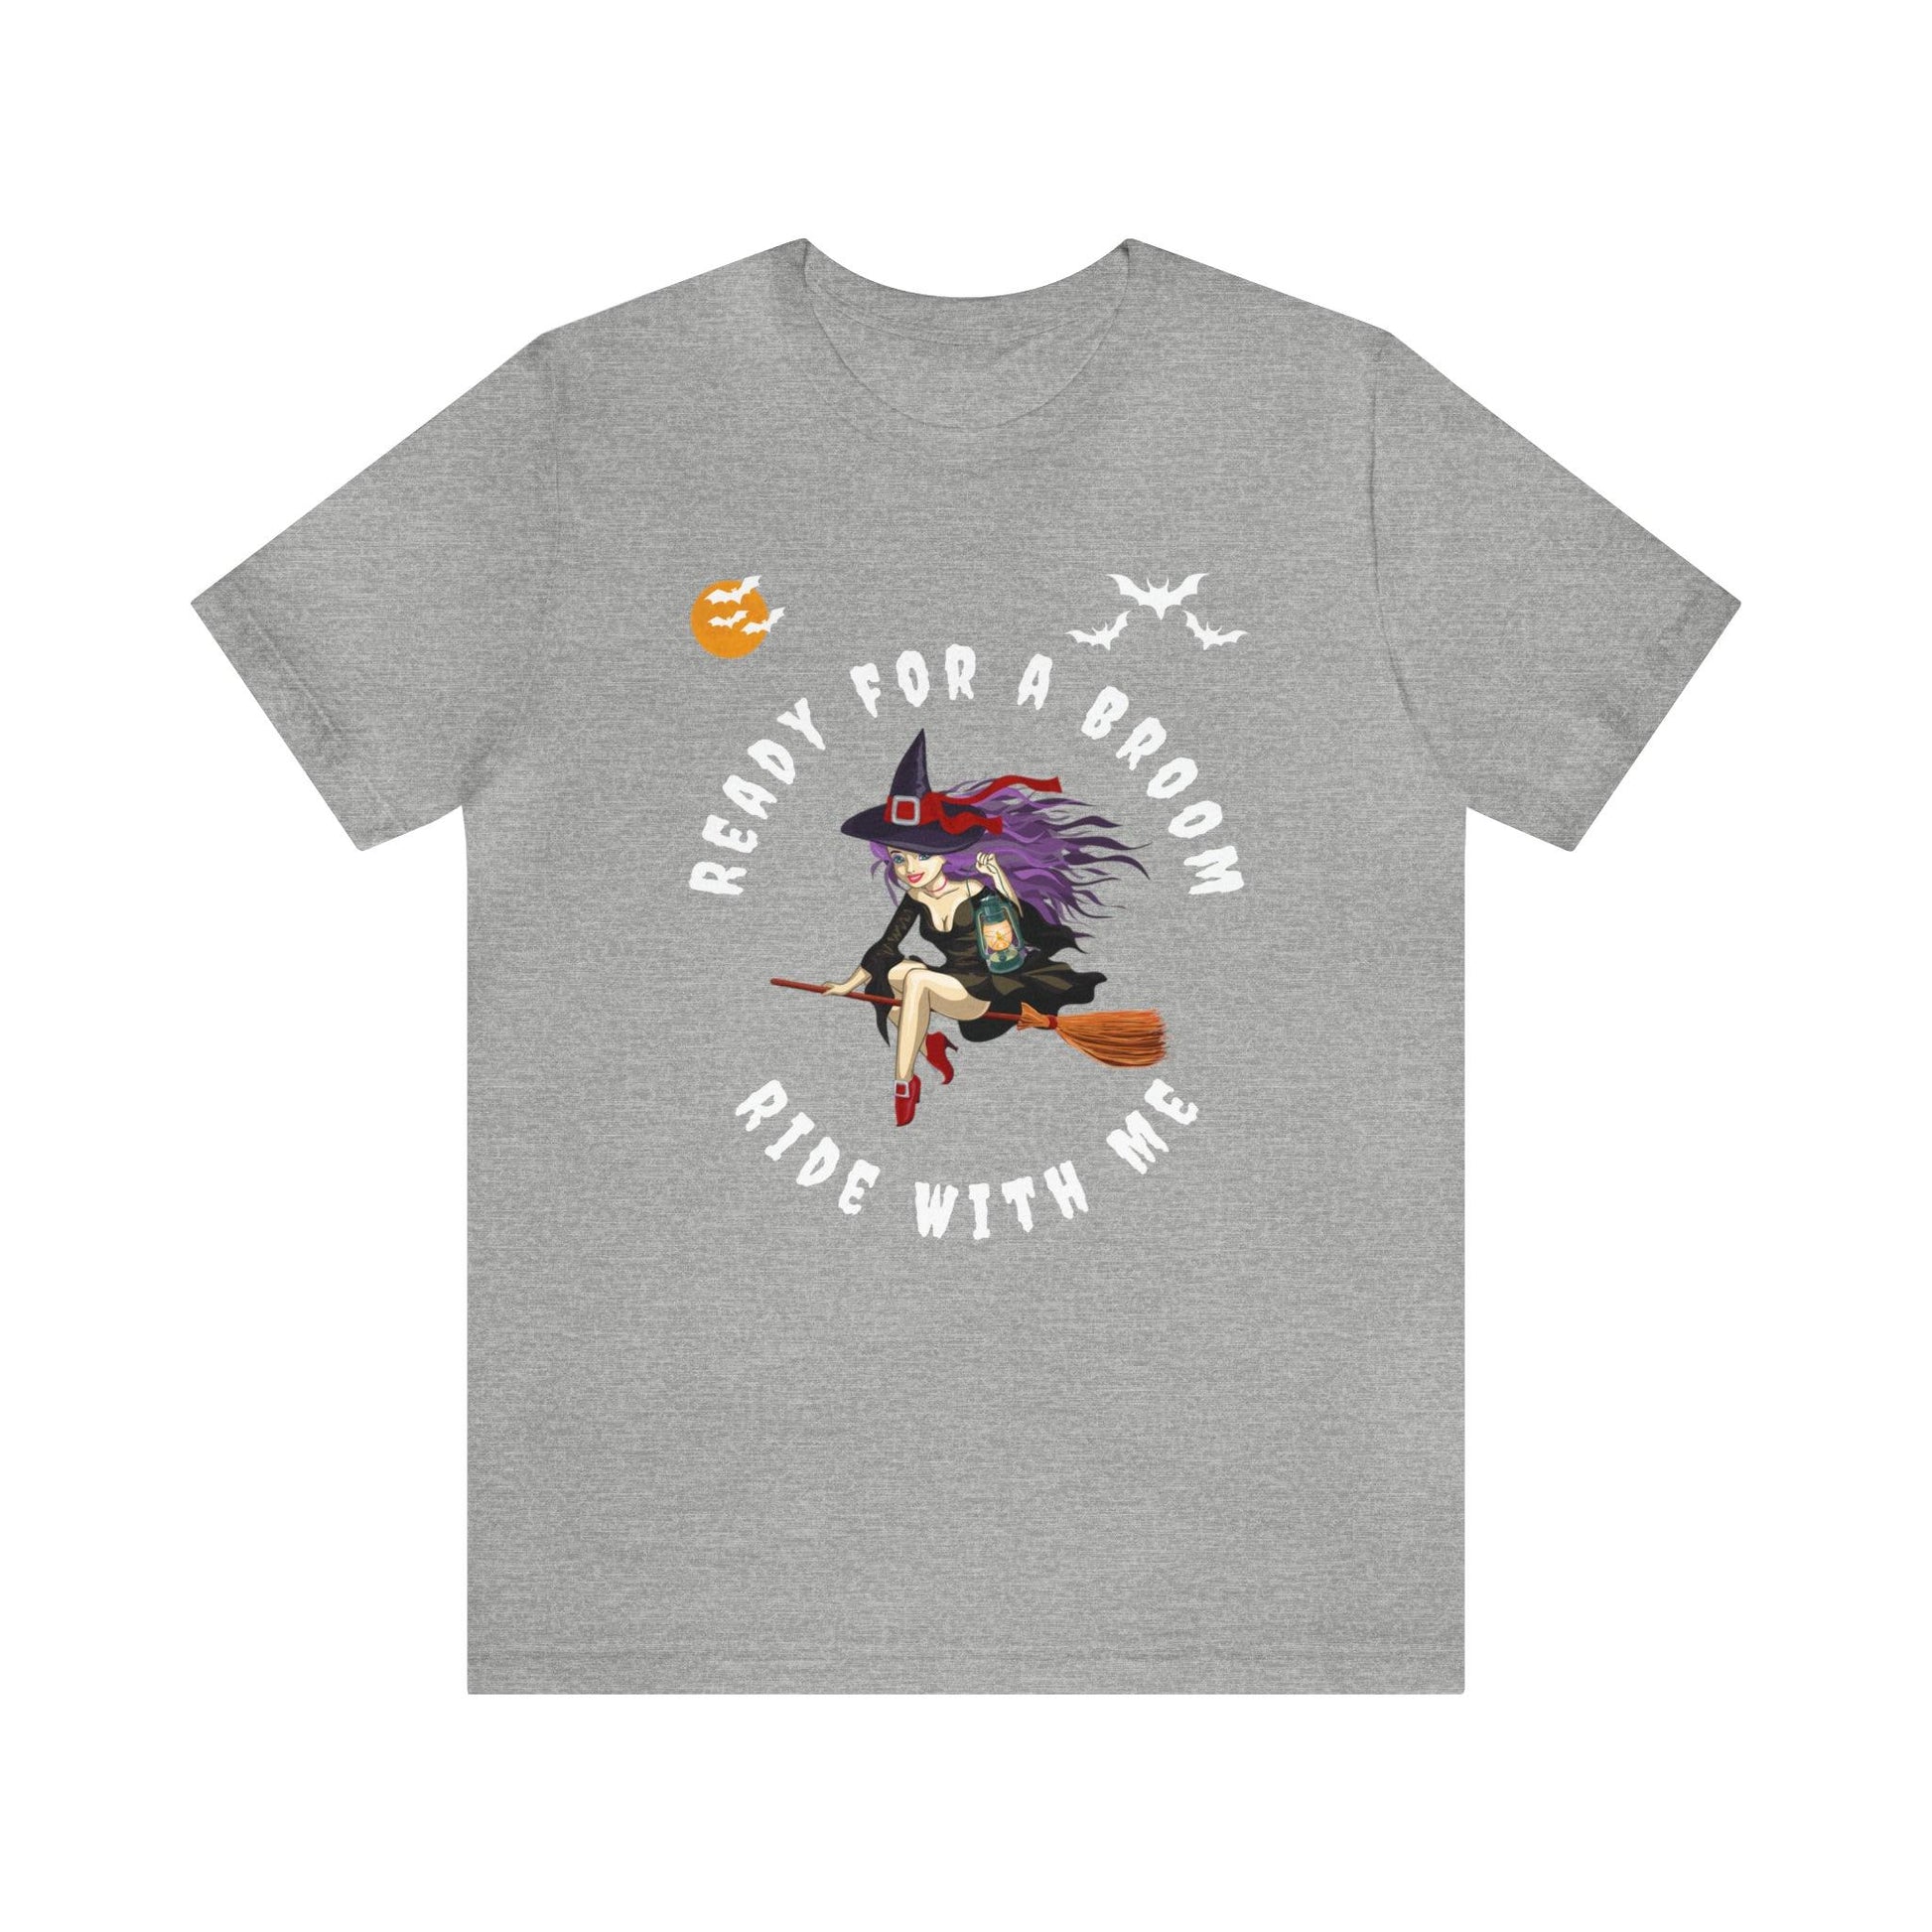 Ready for a Broom Ride with Me Halloween shirt, Witch shirt, Halloween tshirt, Halloween outfit, Work Halloween Costume - Giftsmojo